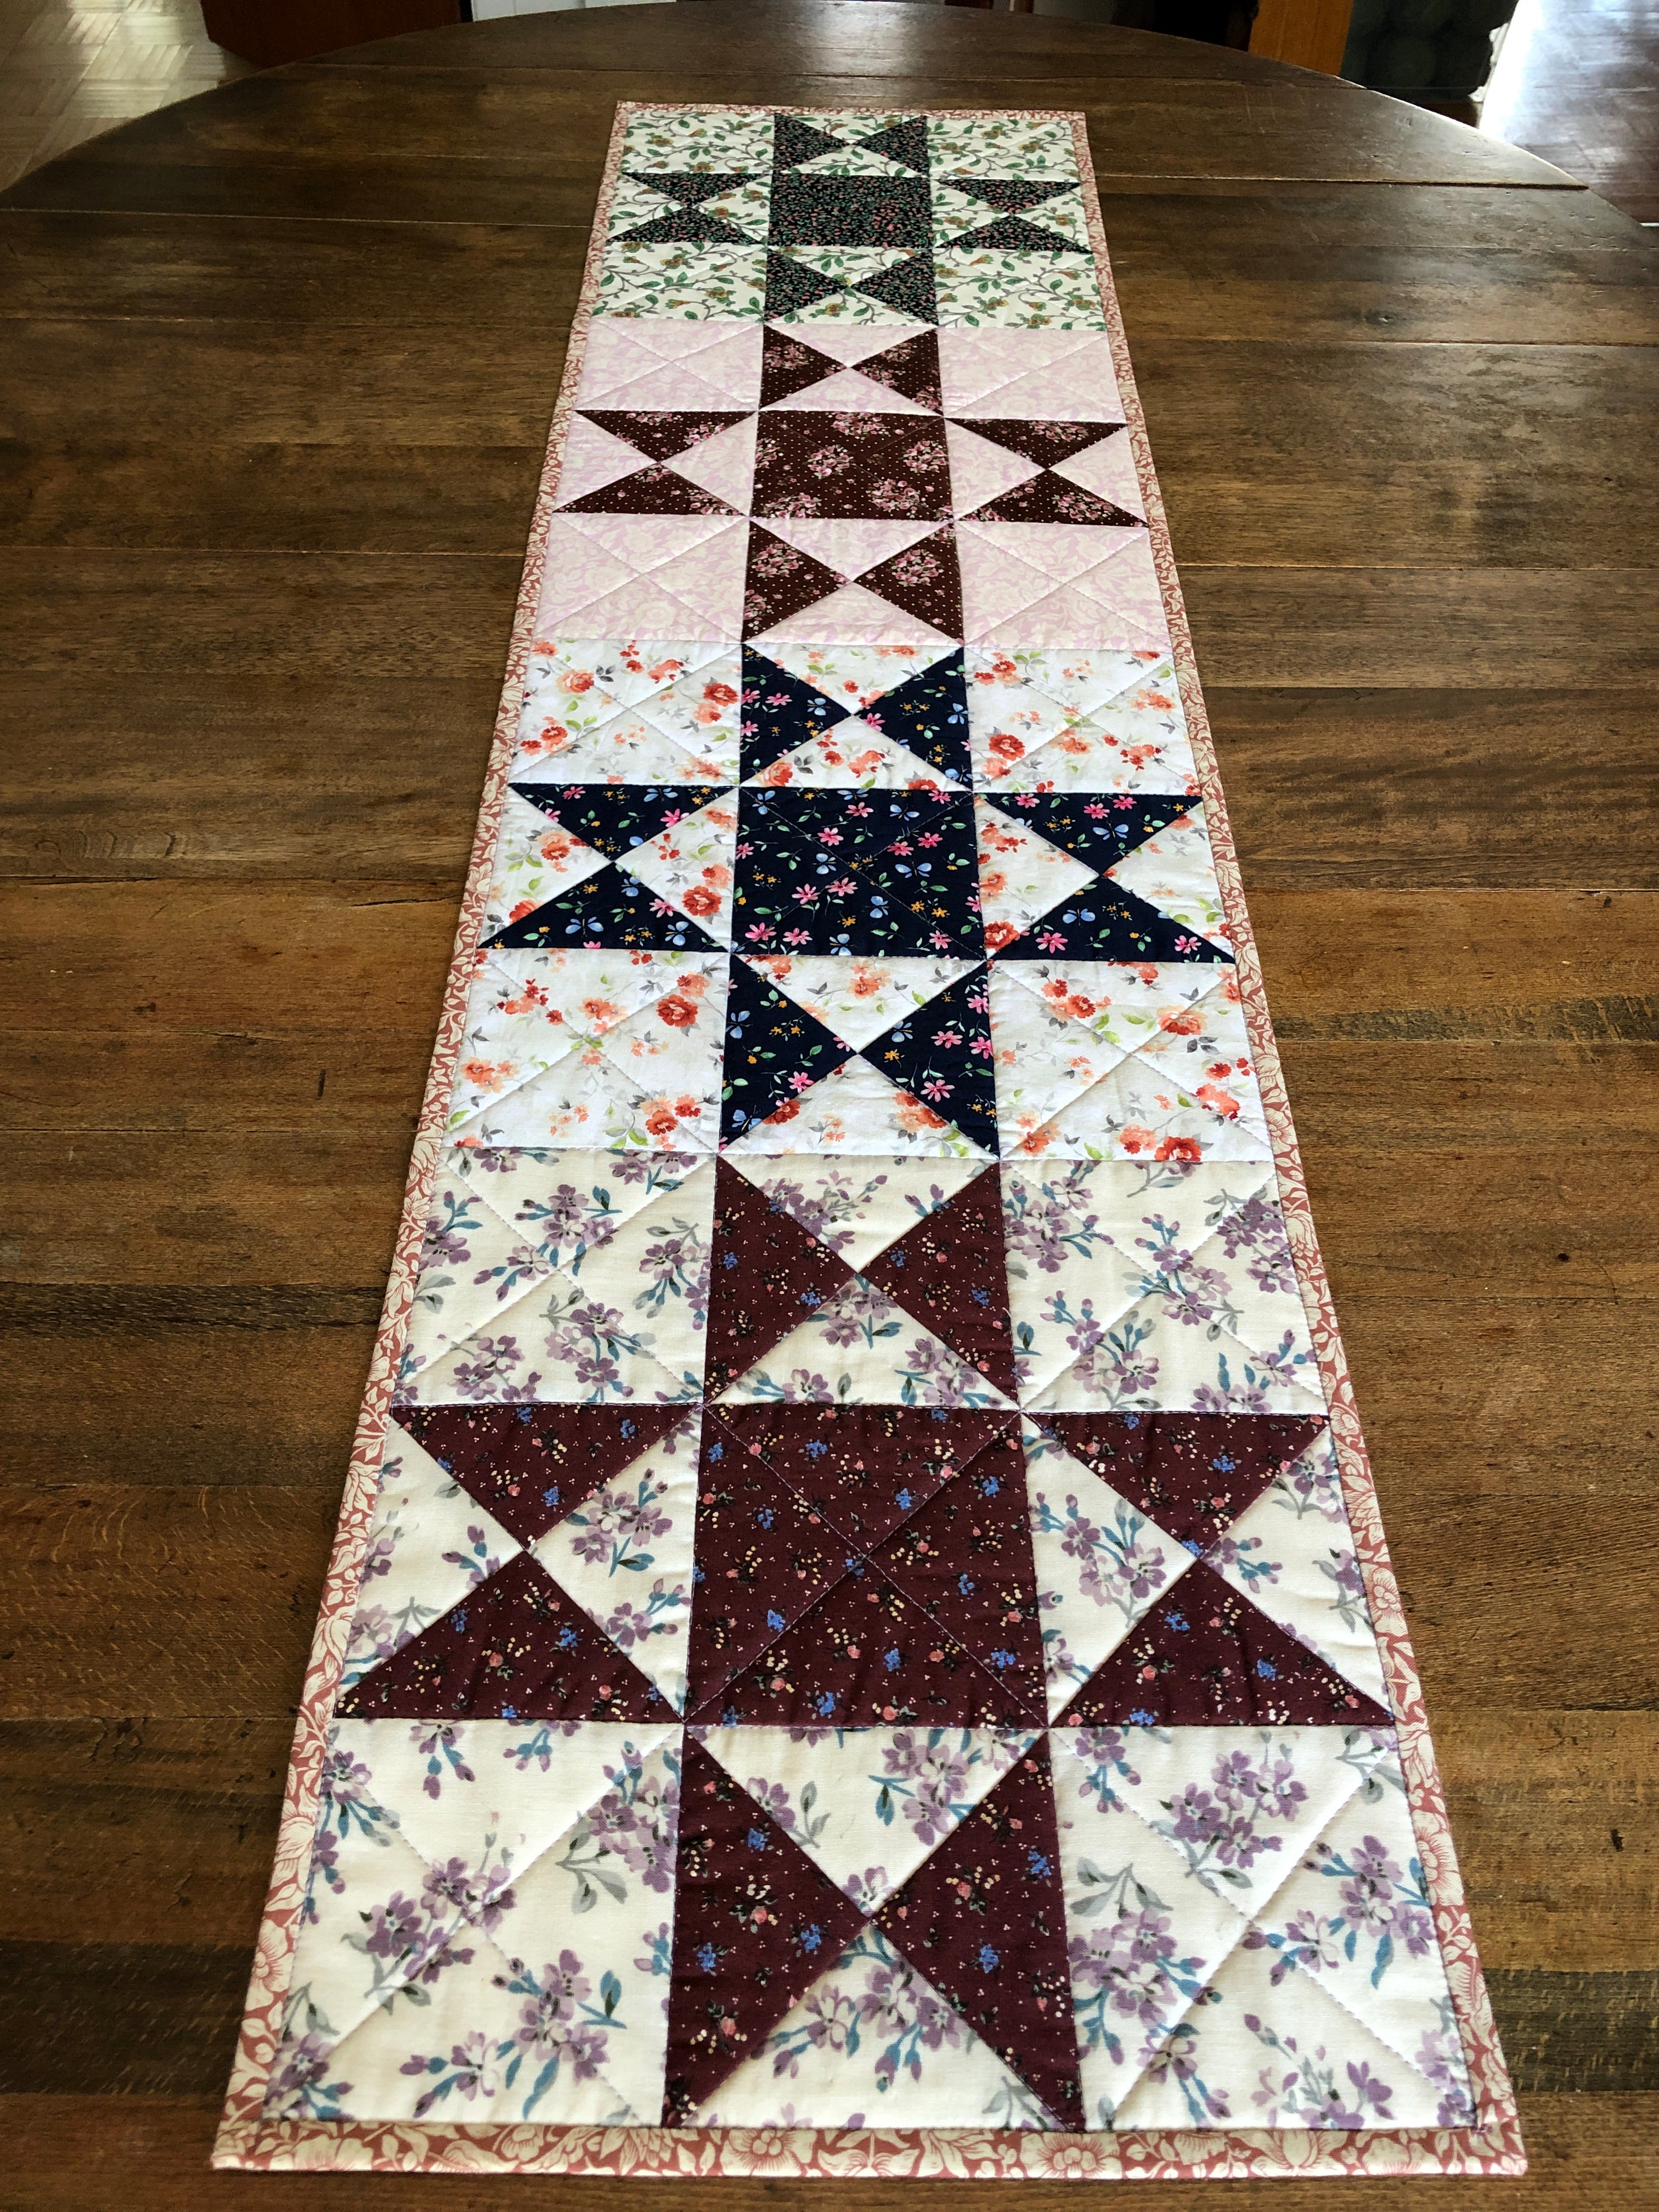 Day & Night Floral Table Runner